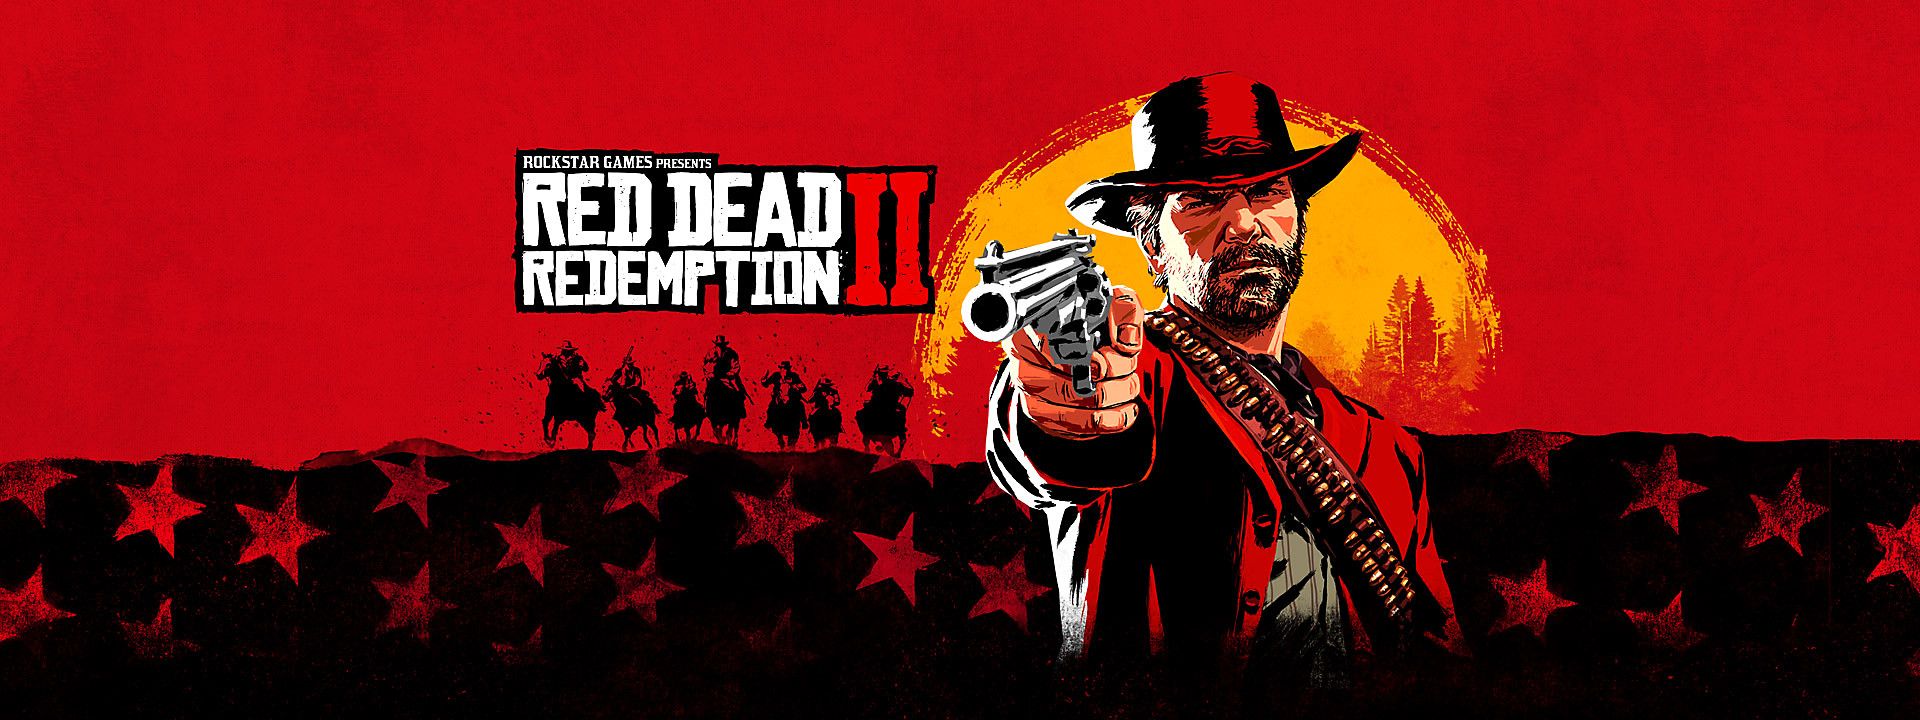 red dead redemption pc 2 failed to reboot